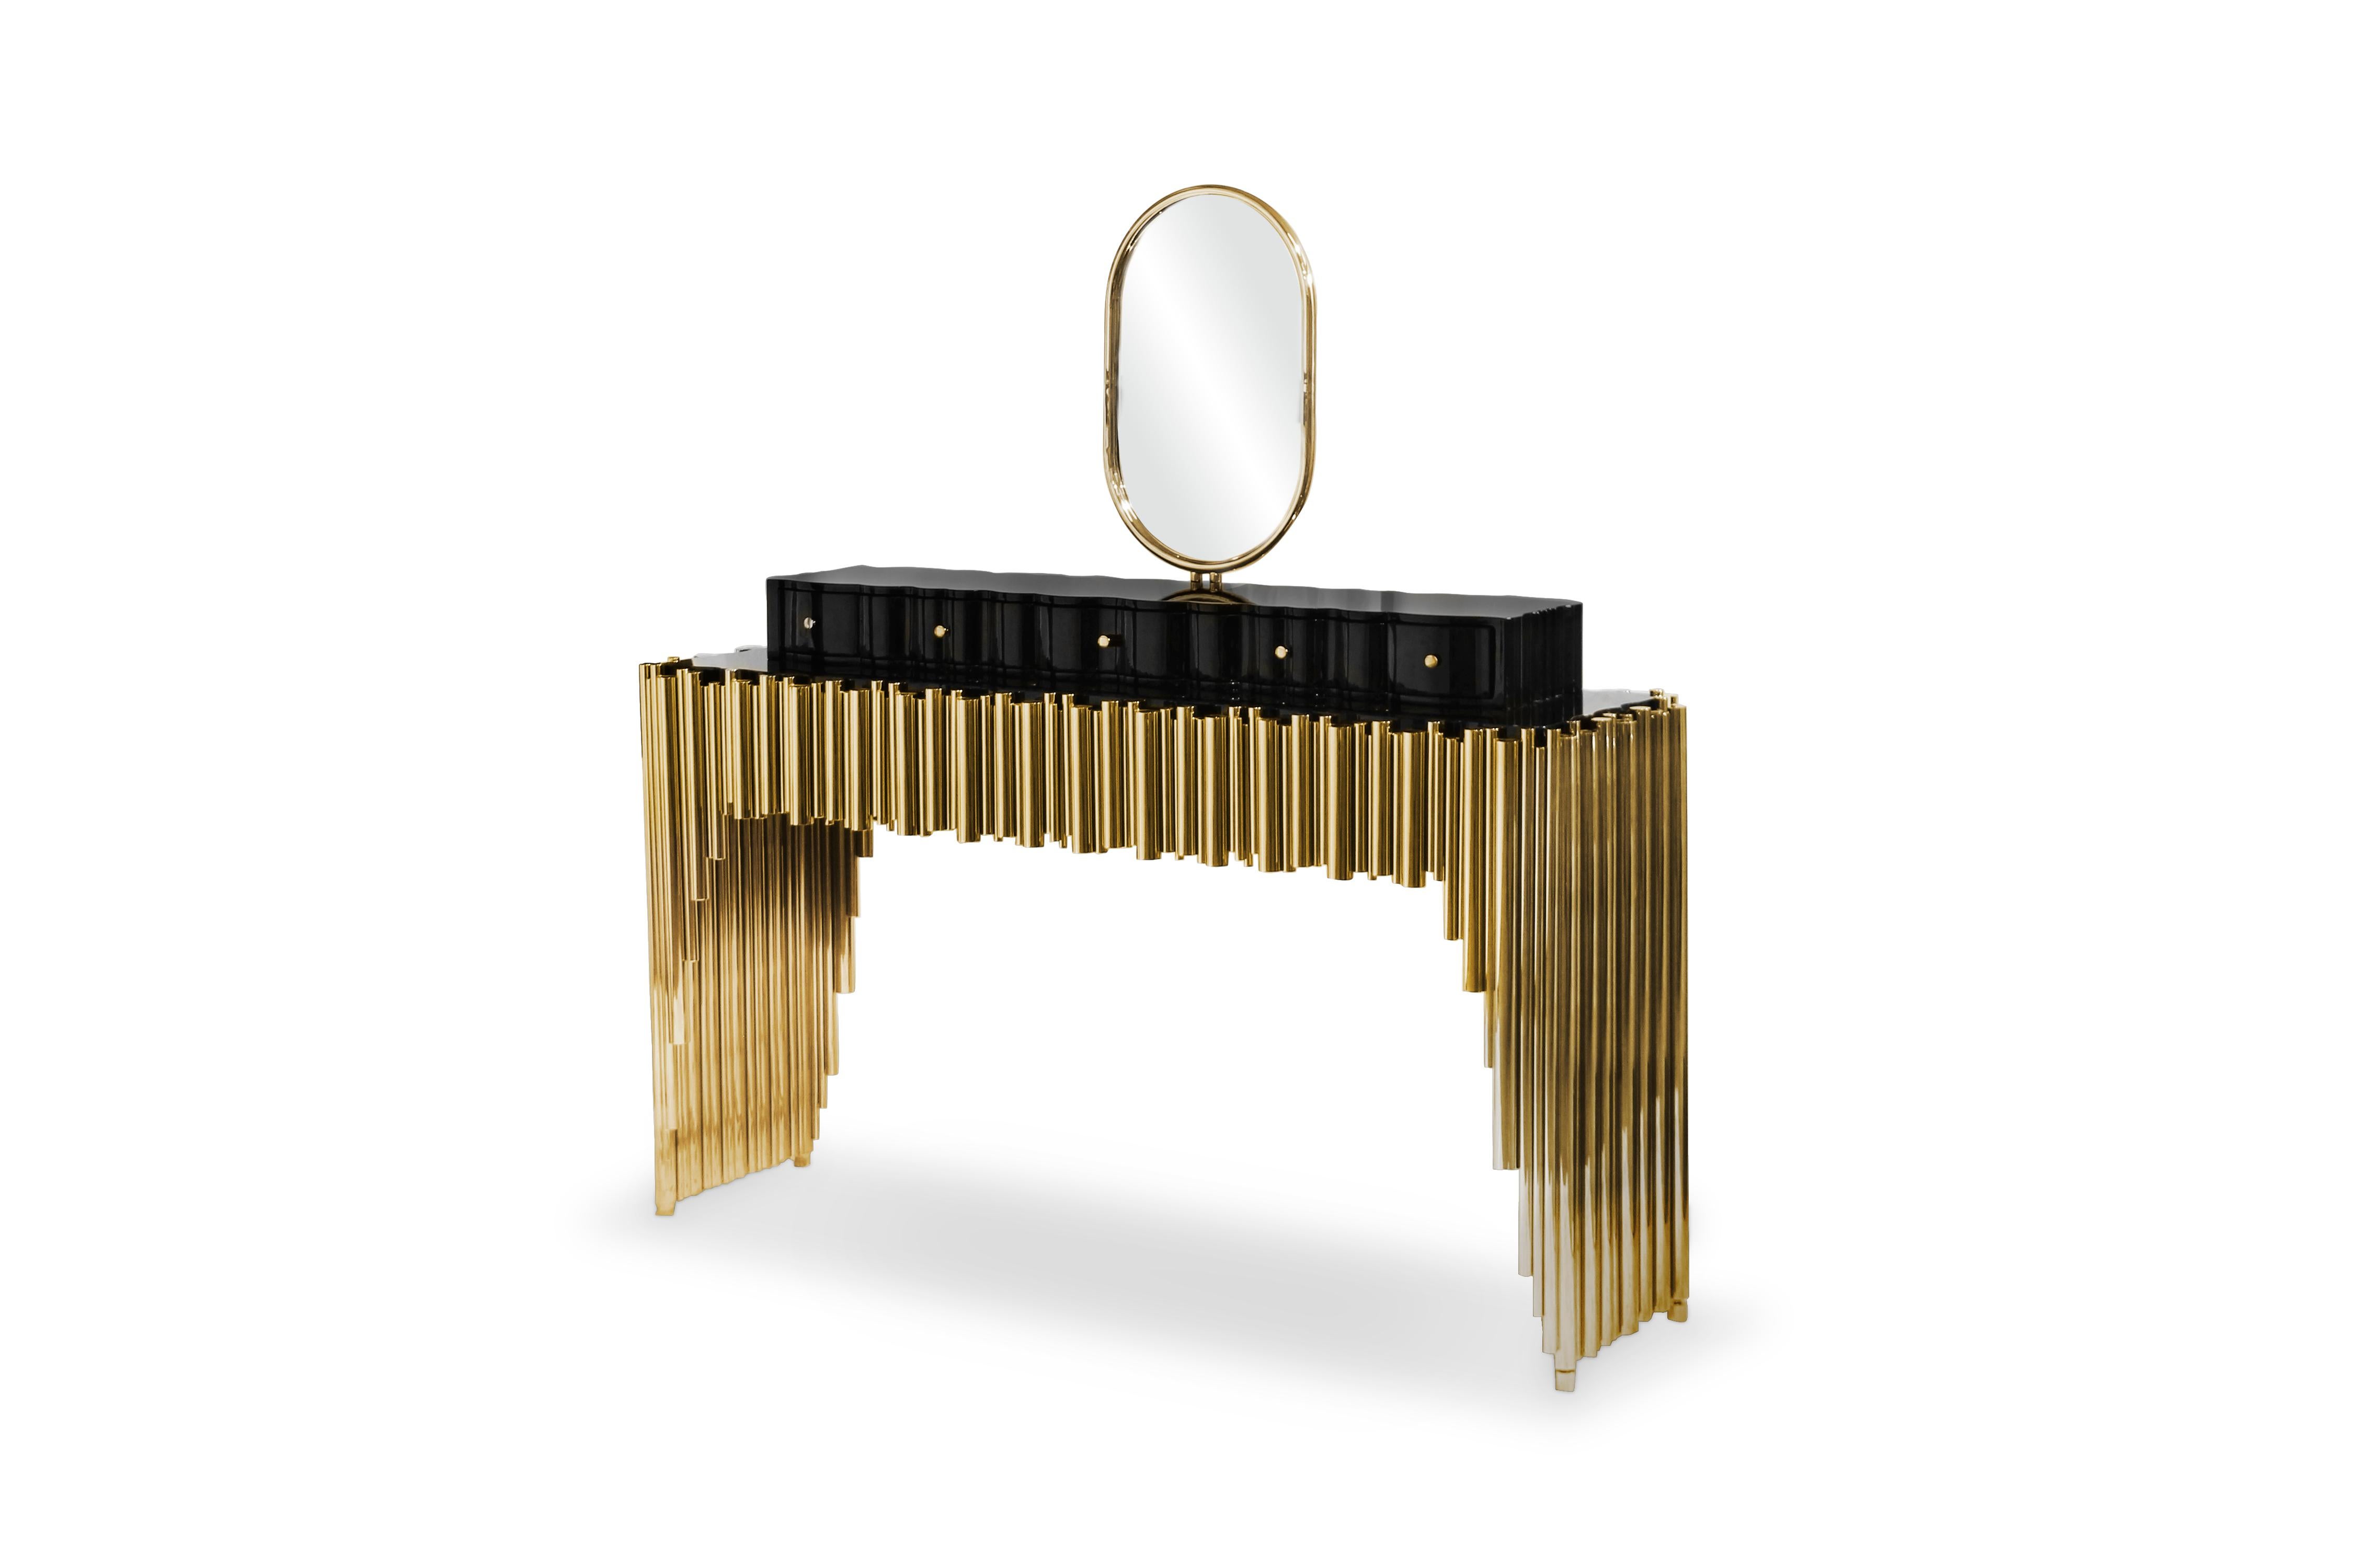 The Symphony dressing table draws inspiration from church organ tubes, as well as the curves of a violin. Like all of Maison Valentina’s designs, the Symphony dressing table is handmade by experienced artisans, each with different specialties, from